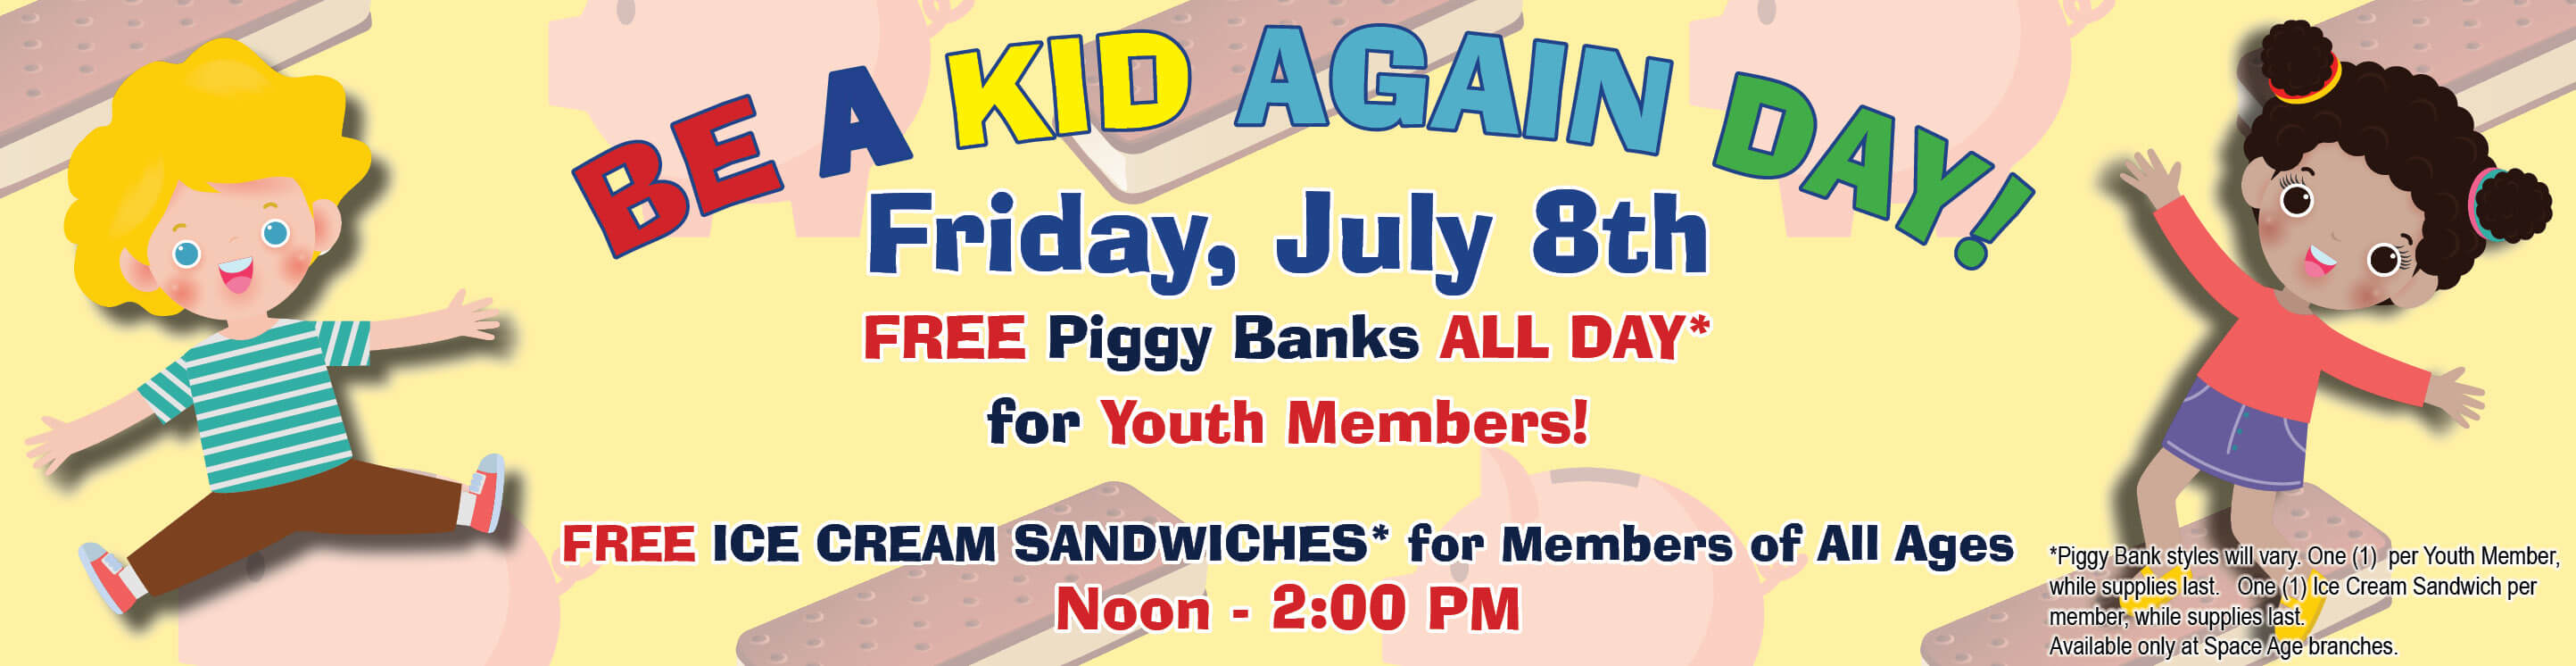 Be A Kid Again Day Free Piggy Banks and Ice Cream Sandwiches Noon - 2PM